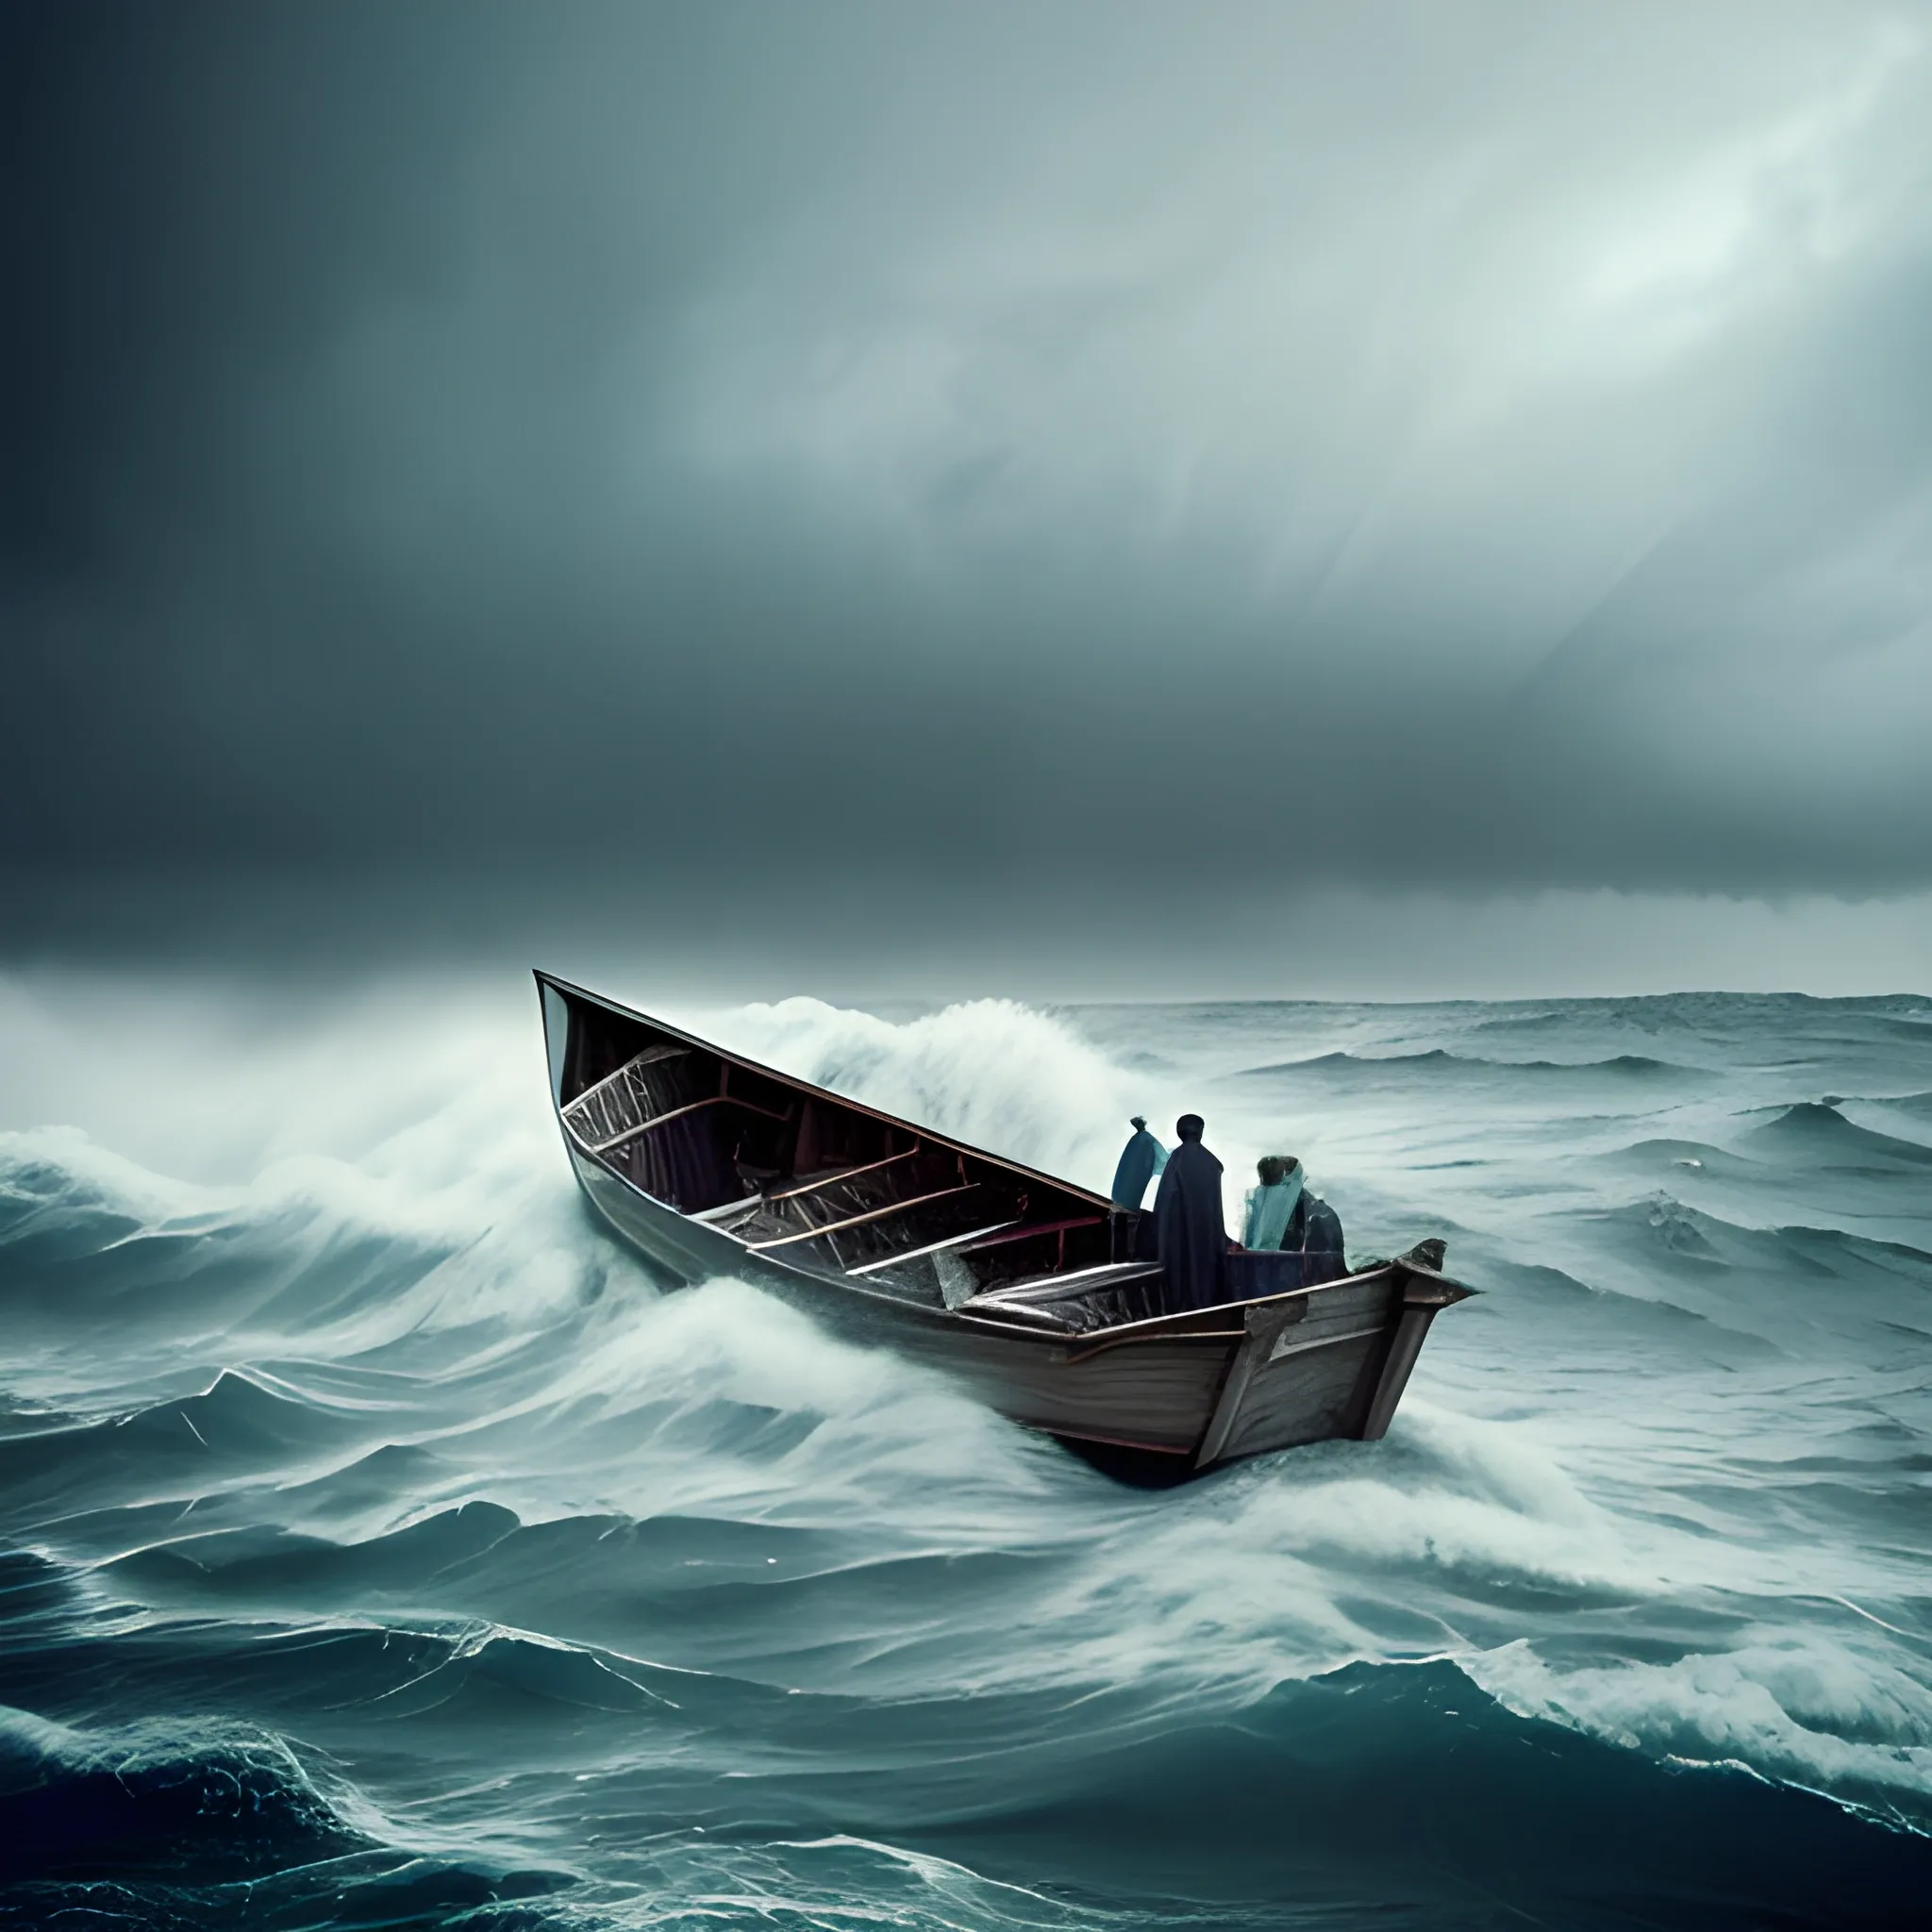 ghost migrants in a boat on the stormy sea, photography